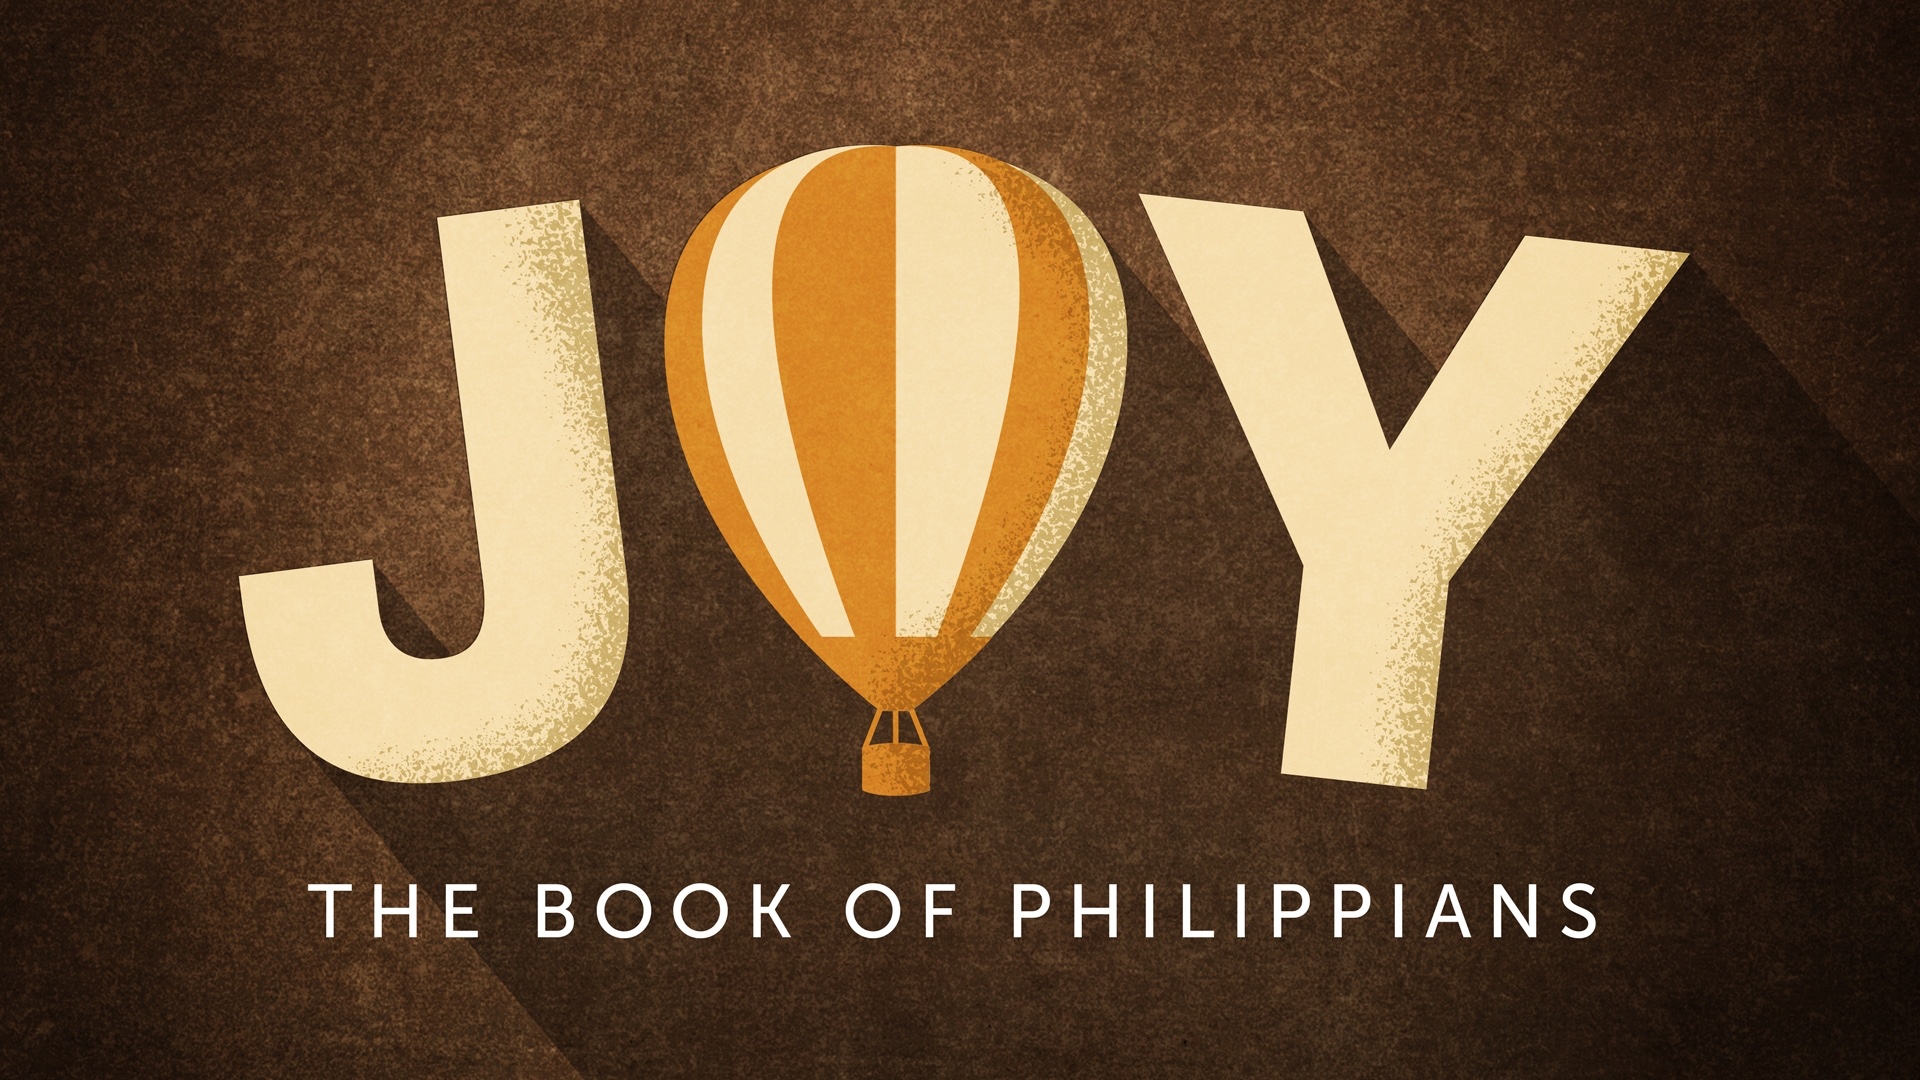 Joy: The Book of Philippians - Finding Joy in Contentment